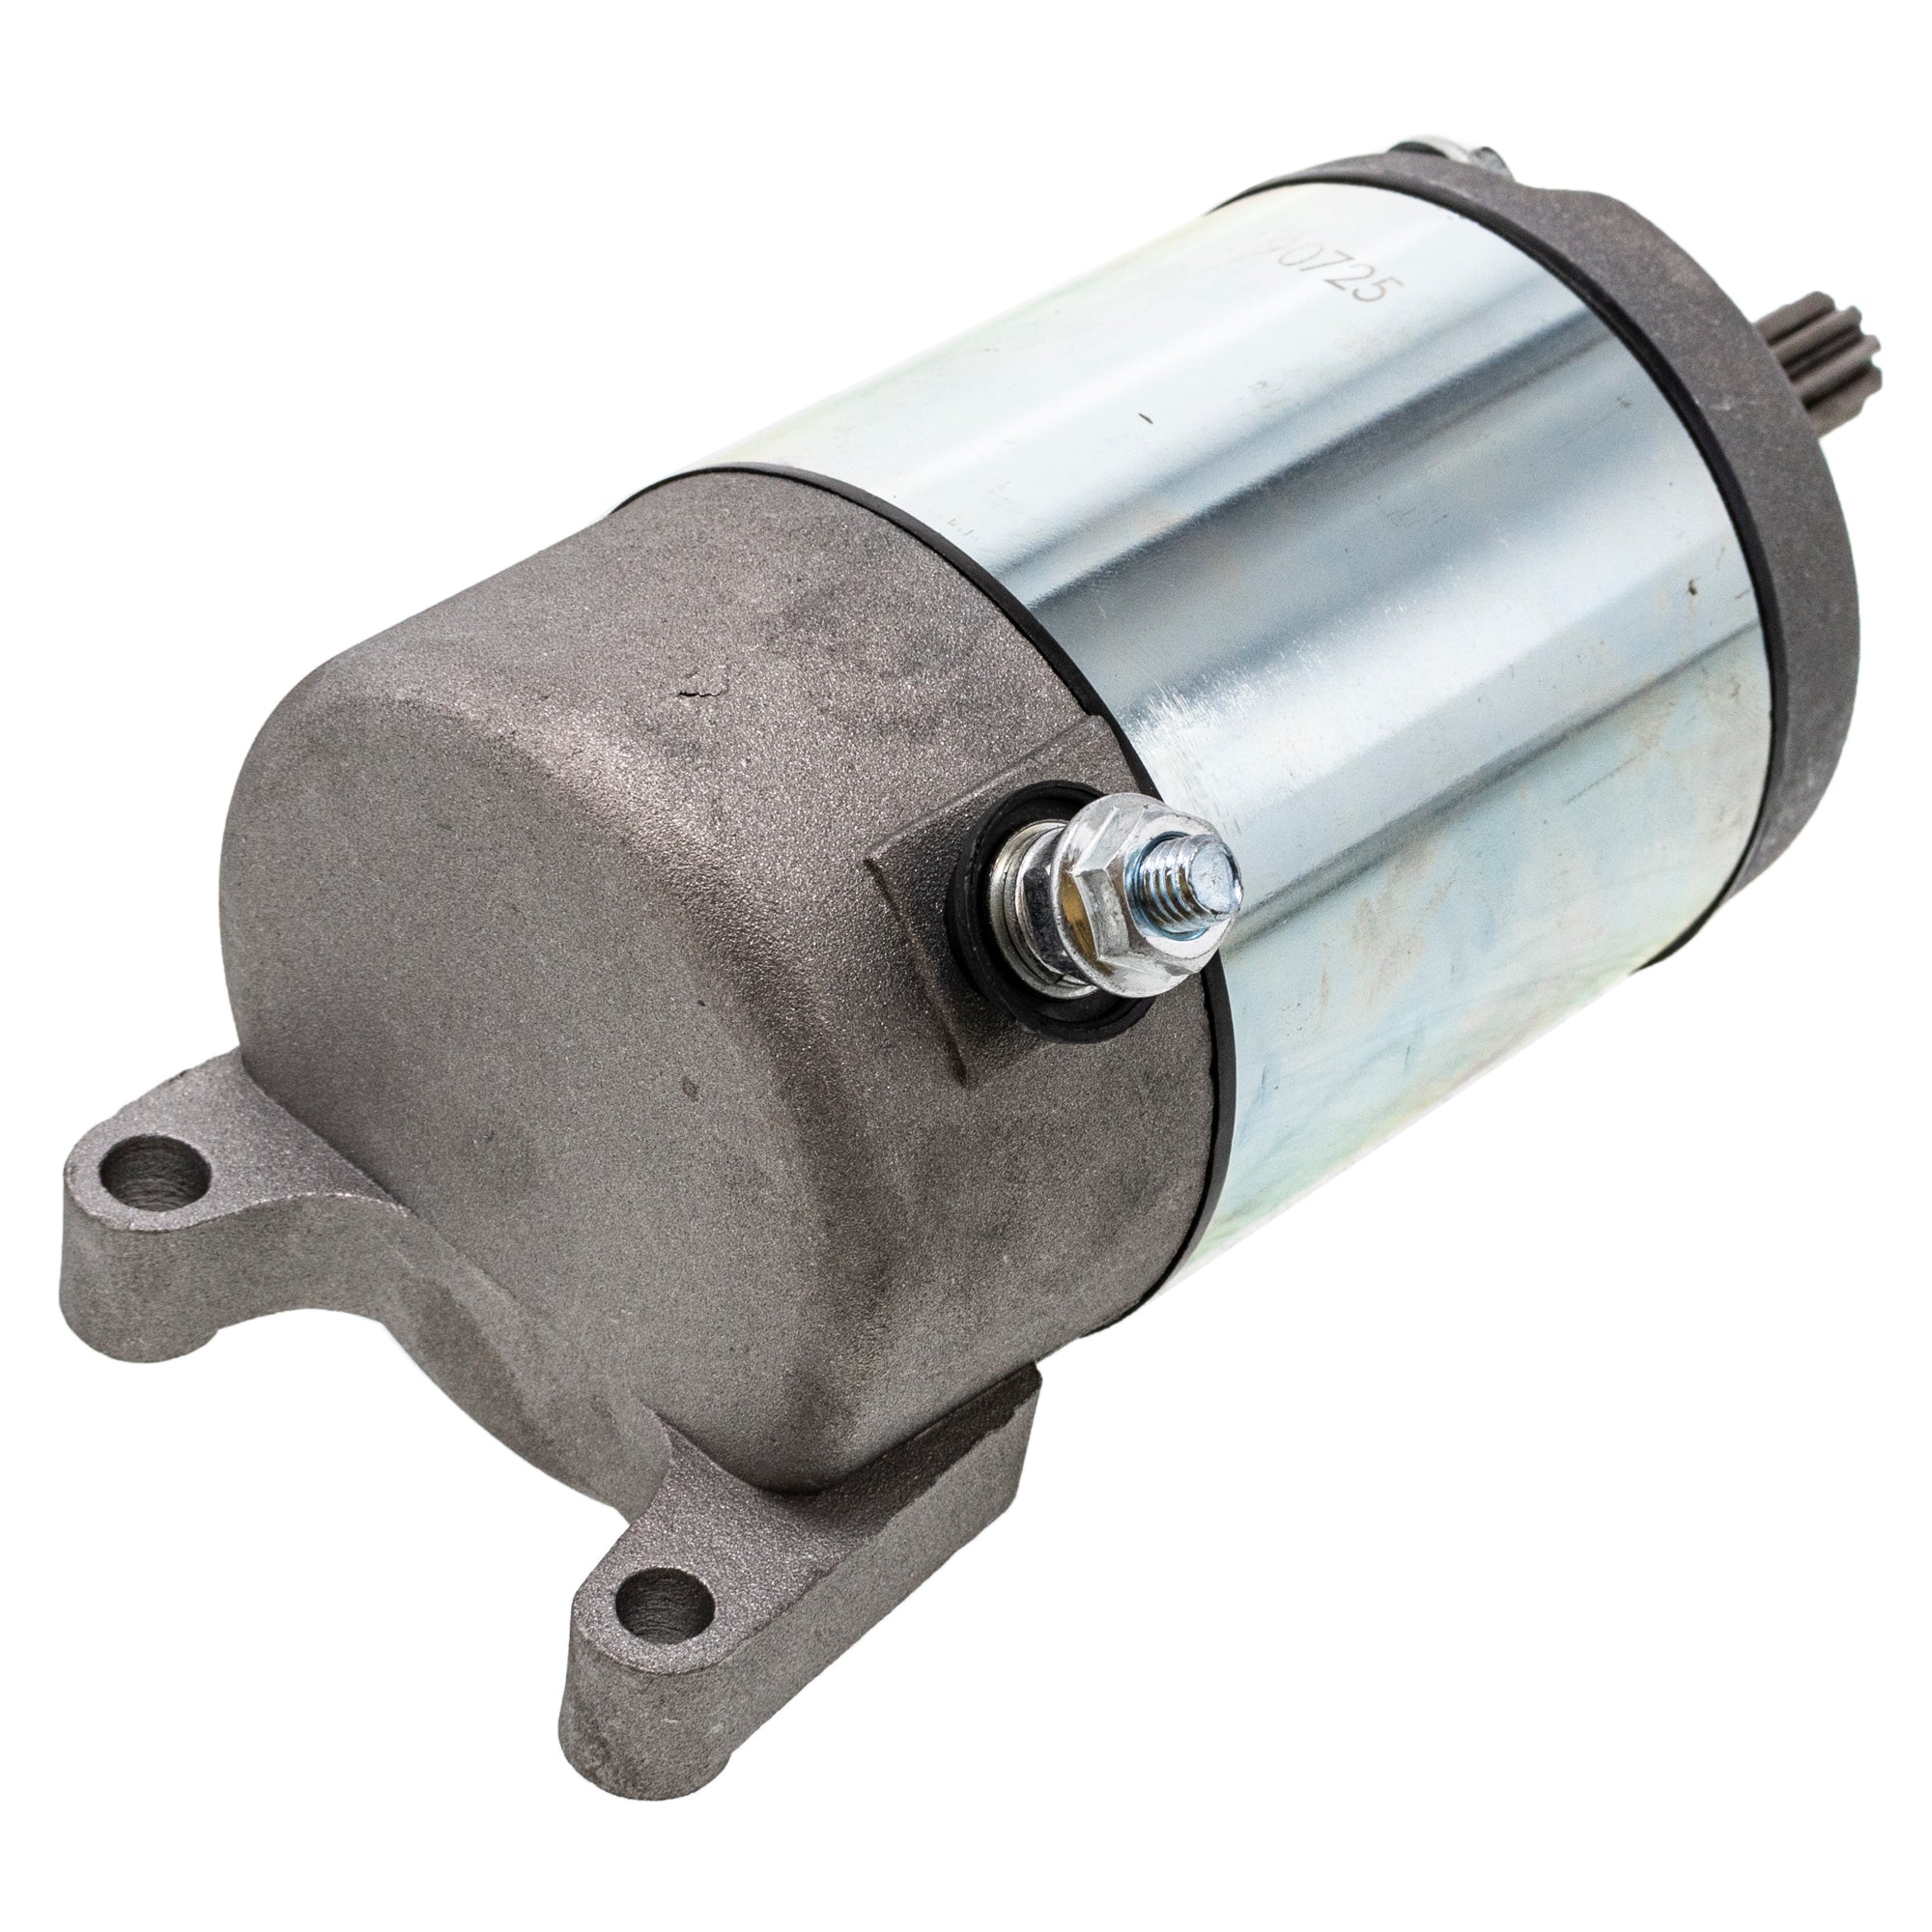 Starter Motor for Yamaha Grizzly Wolverine 350 YZF600R 3HE-81890-00-00